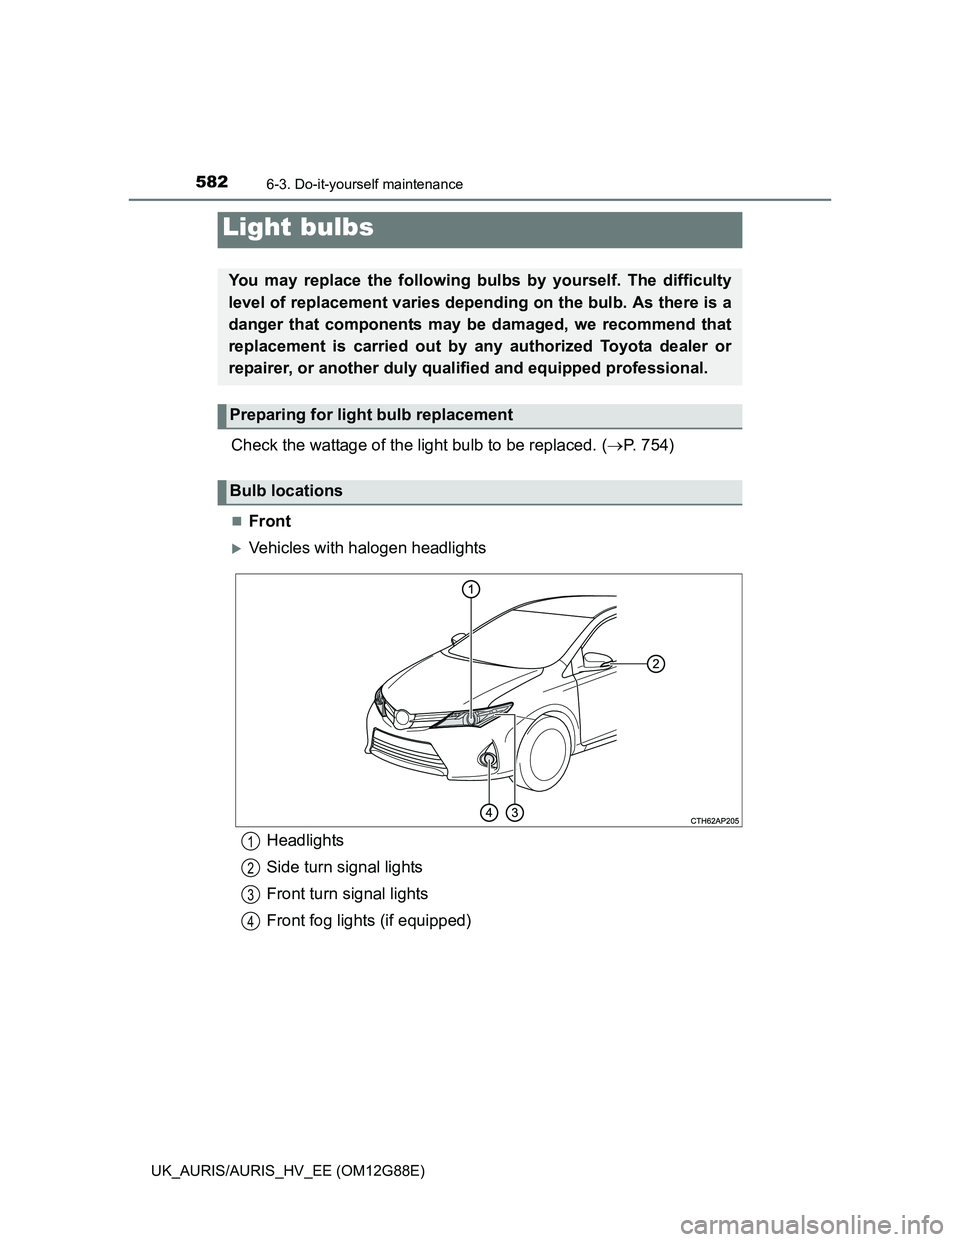 TOYOTA AURIS HYBRID 2014  Owners Manual 5826-3. Do-it-yourself maintenance
UK_AURIS/AURIS_HV_EE (OM12G88E)
Check the wattage of the light bulb to be replaced. (P. 754)
Front
Vehicles with halogen headlights
Light bulbs
You may repl